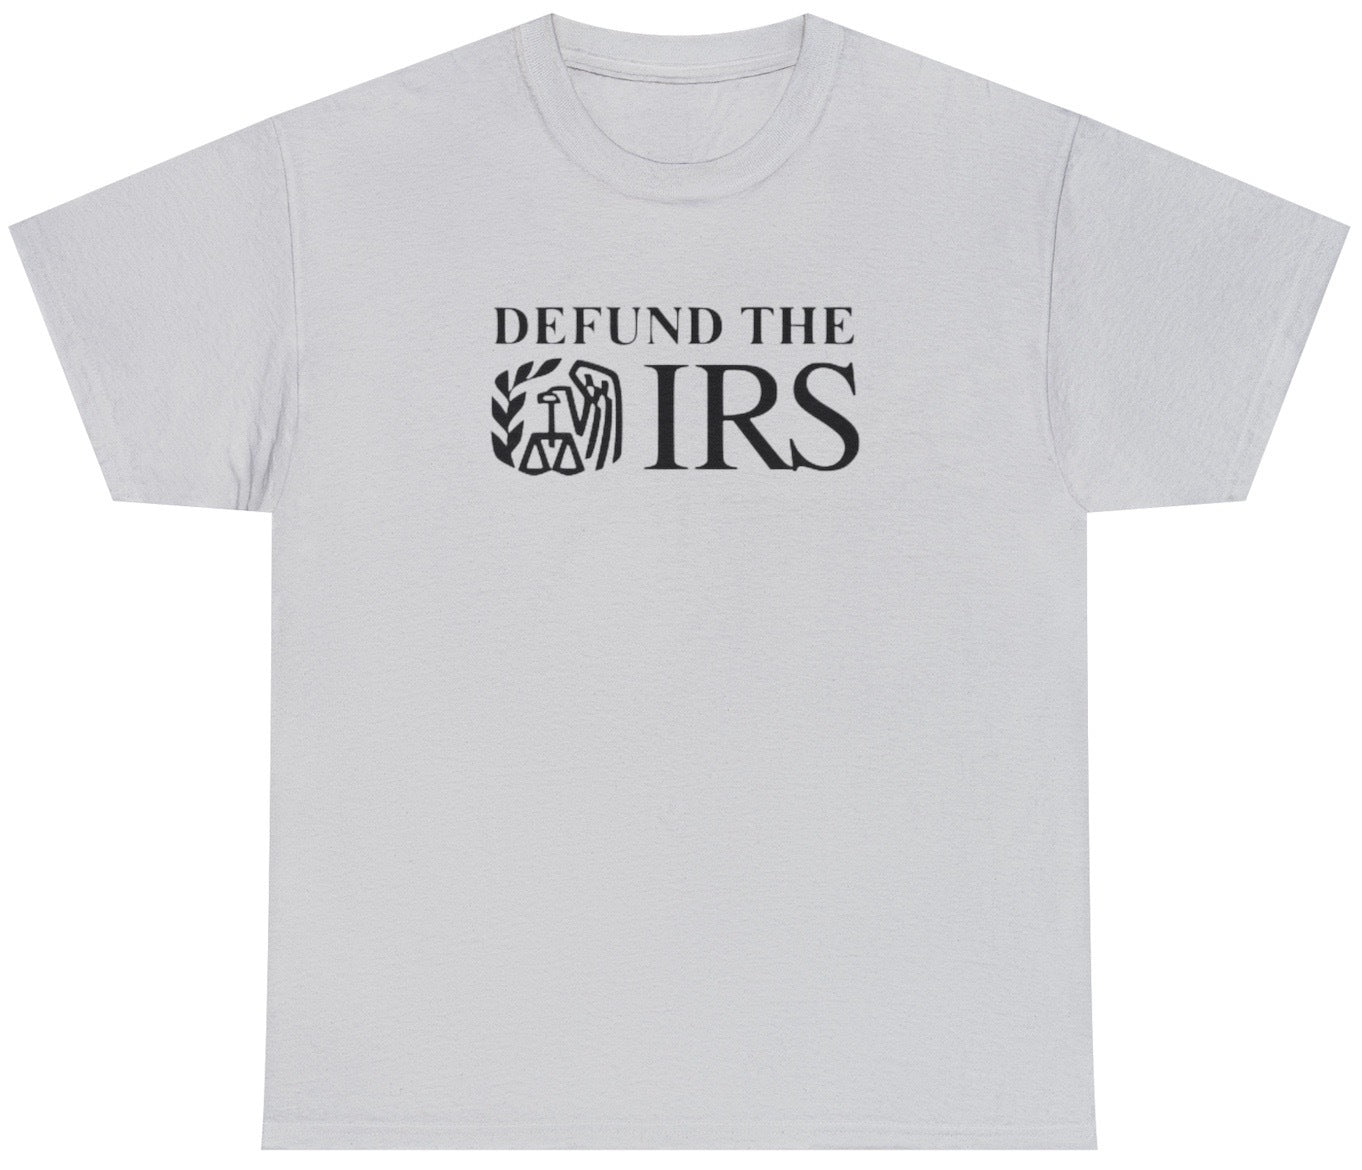 Defund The IRS Tee